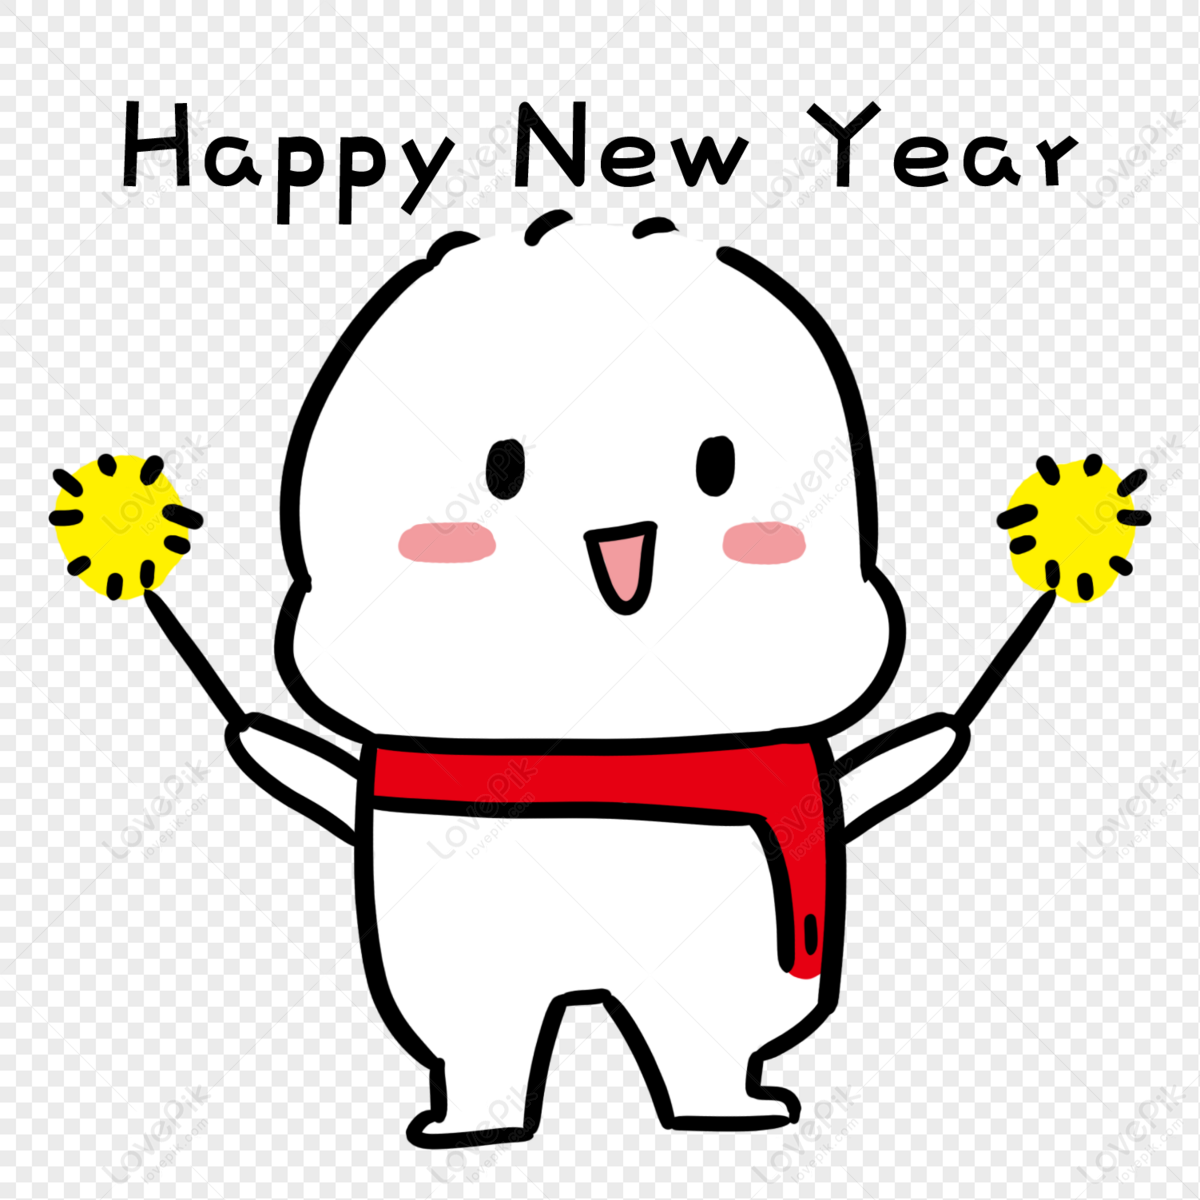 Happy New Year Emoji PNG Picture And Clipart Image For Free Download -  Lovepik | 401660265